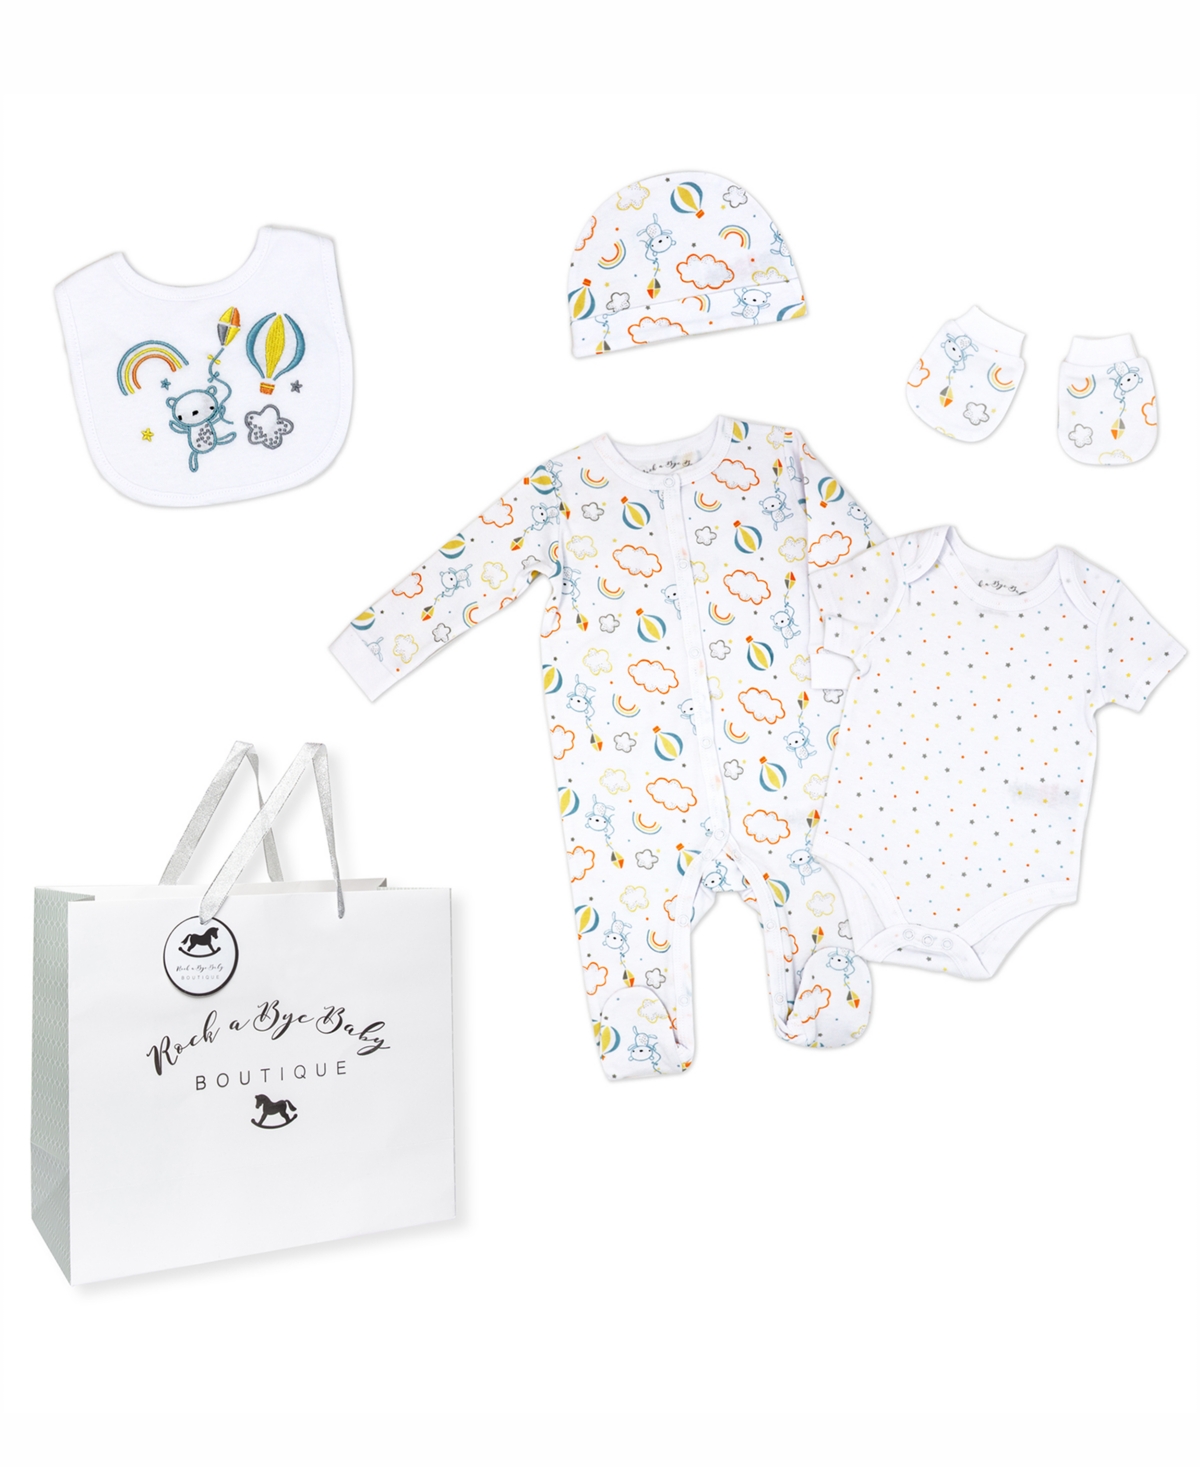 Rock-a-bye Baby Boutique Baby Boys Or Baby Girls Layette Gift Bag Set In Rainbows And Balloons